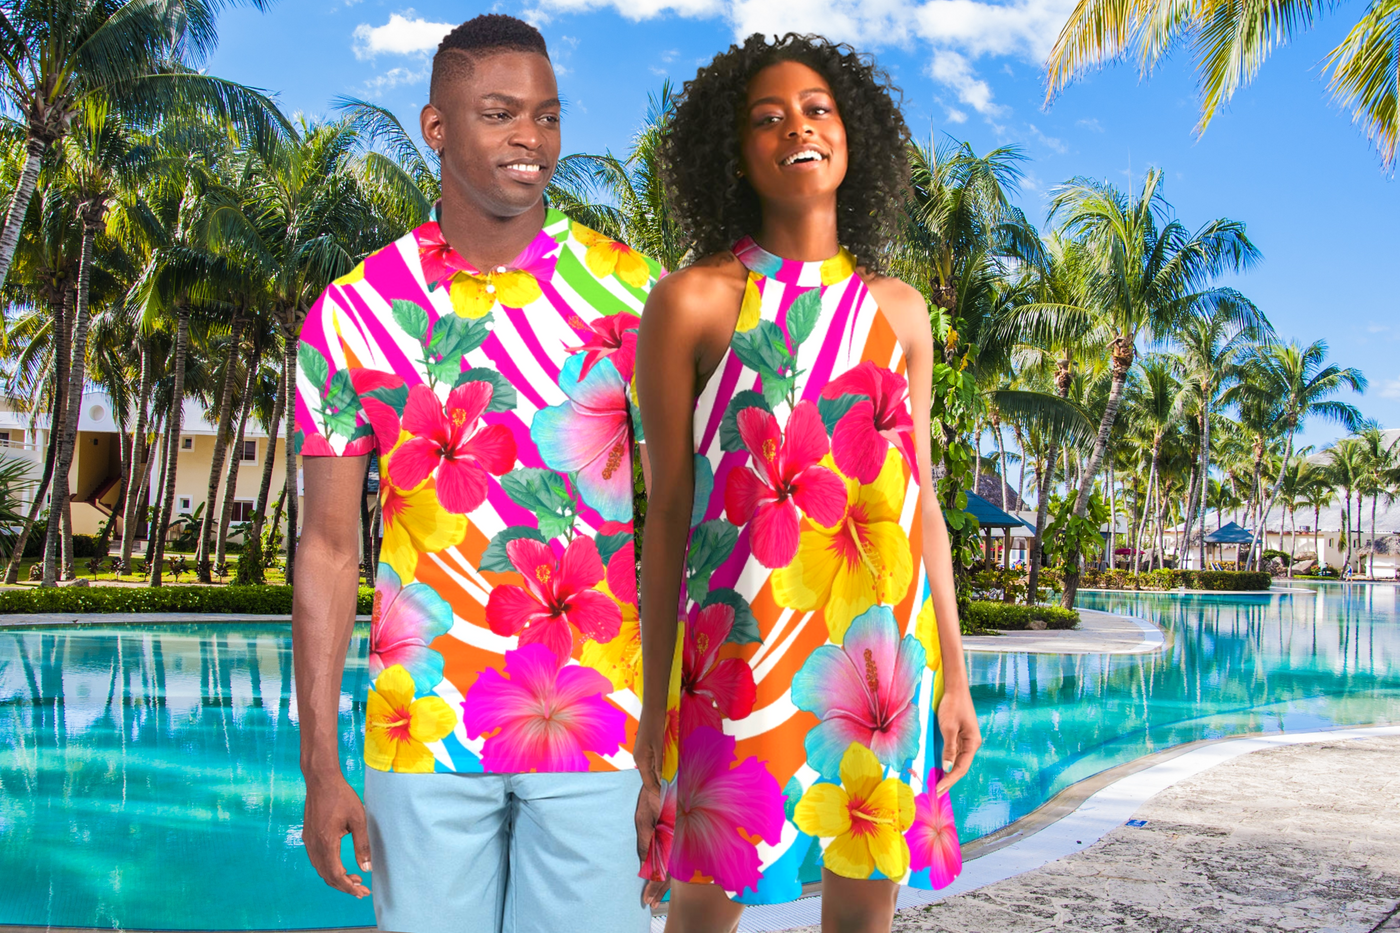 Bahama Bella Couples Matching Outfit Island Flowers Print Men's Polo Shirt and Women's Halter Dress.